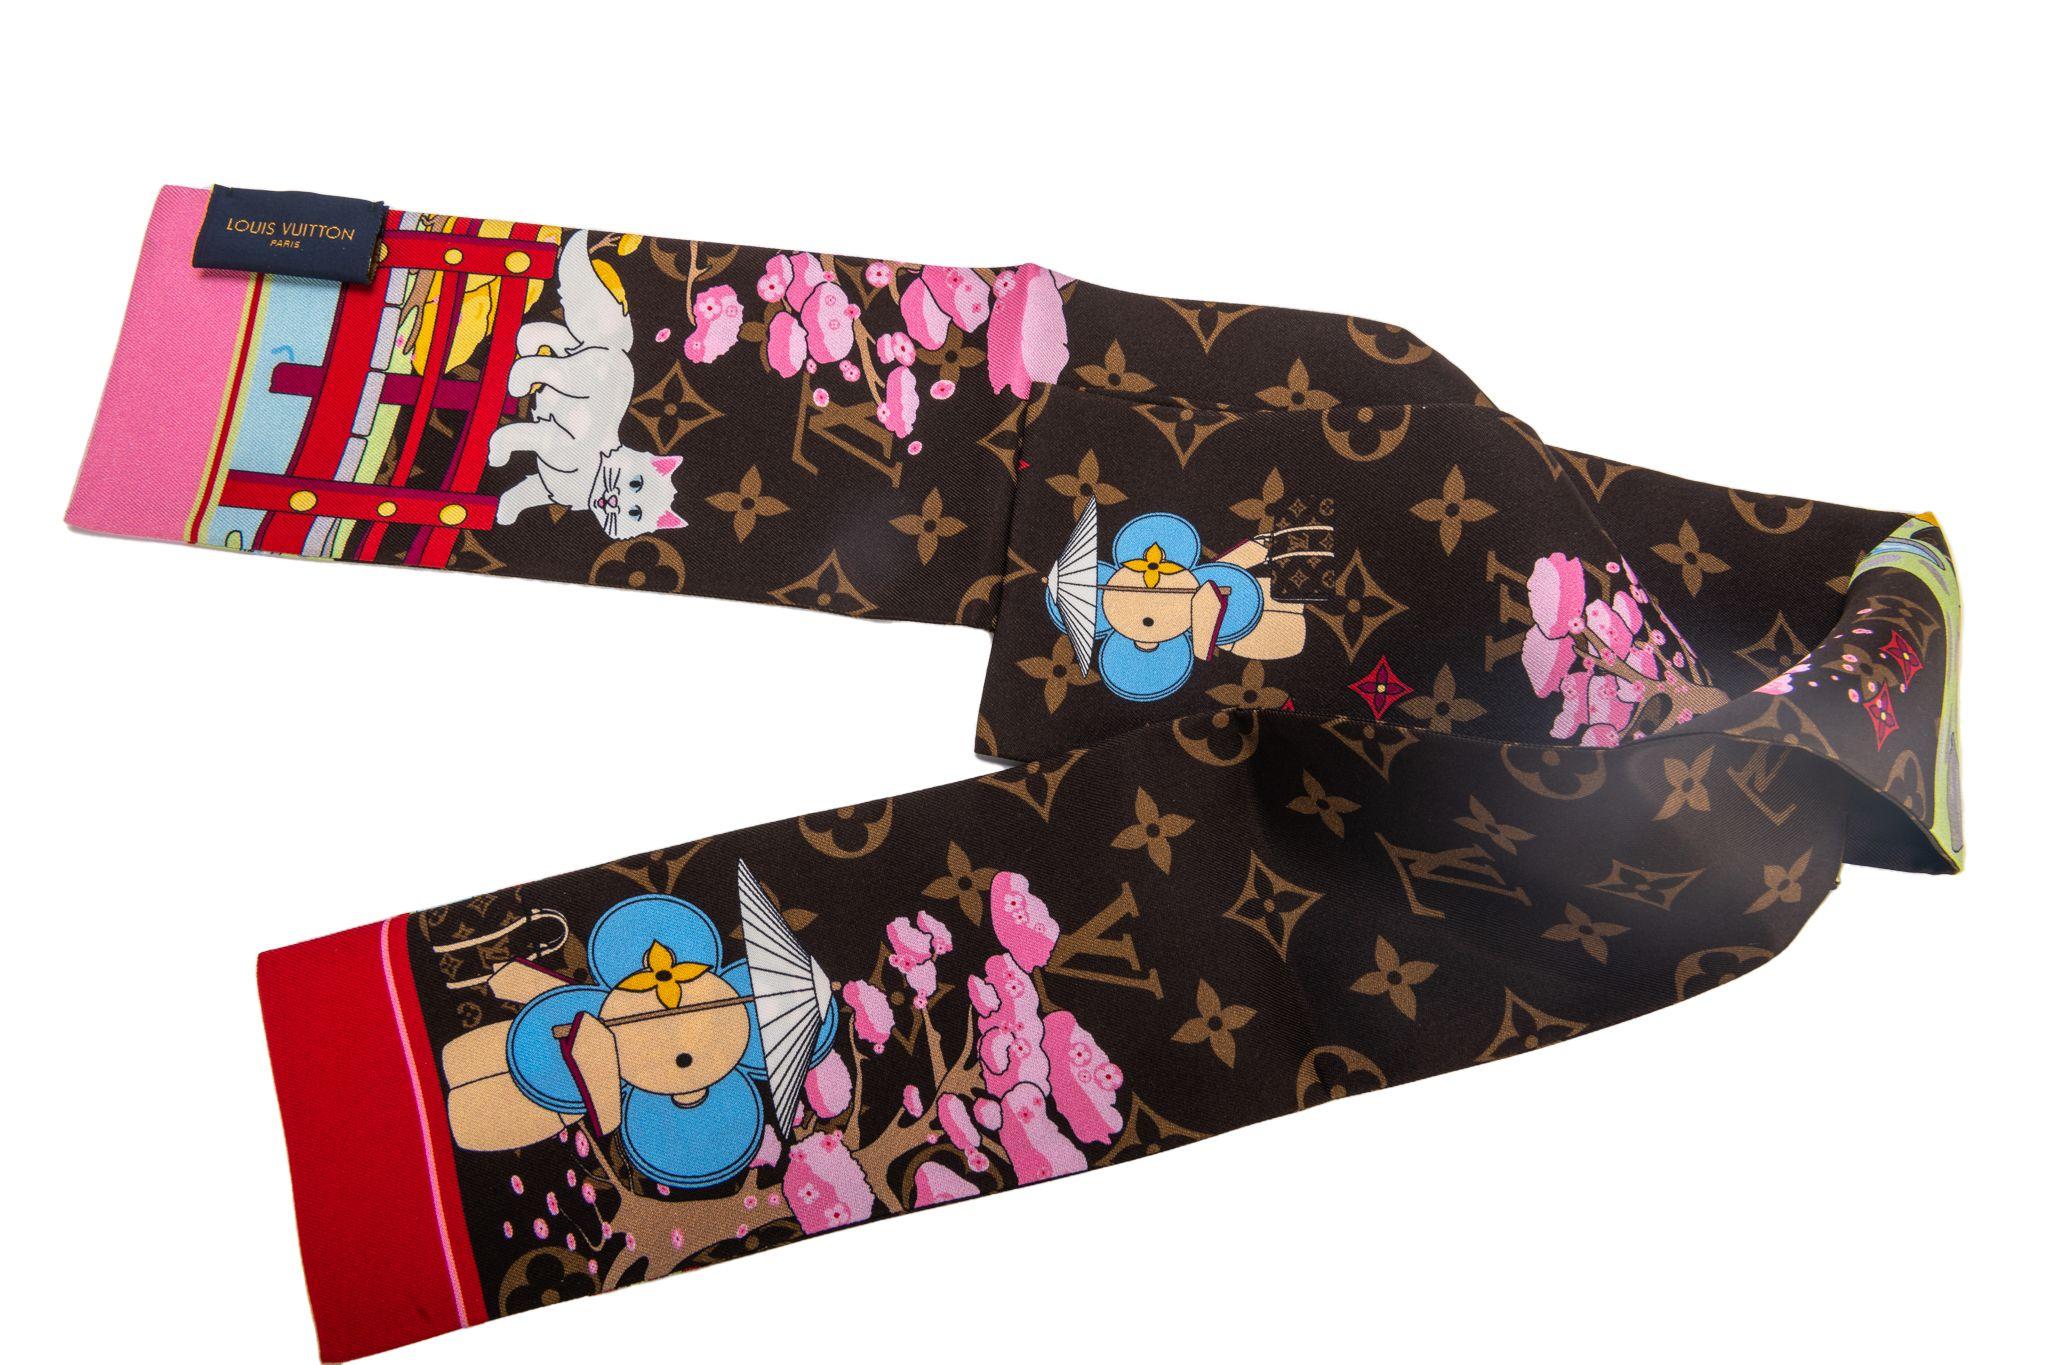 Louis Vuitton Christmas 2021 silk bandeau with Vivienne traveling in Japan design. Brand new in original box .